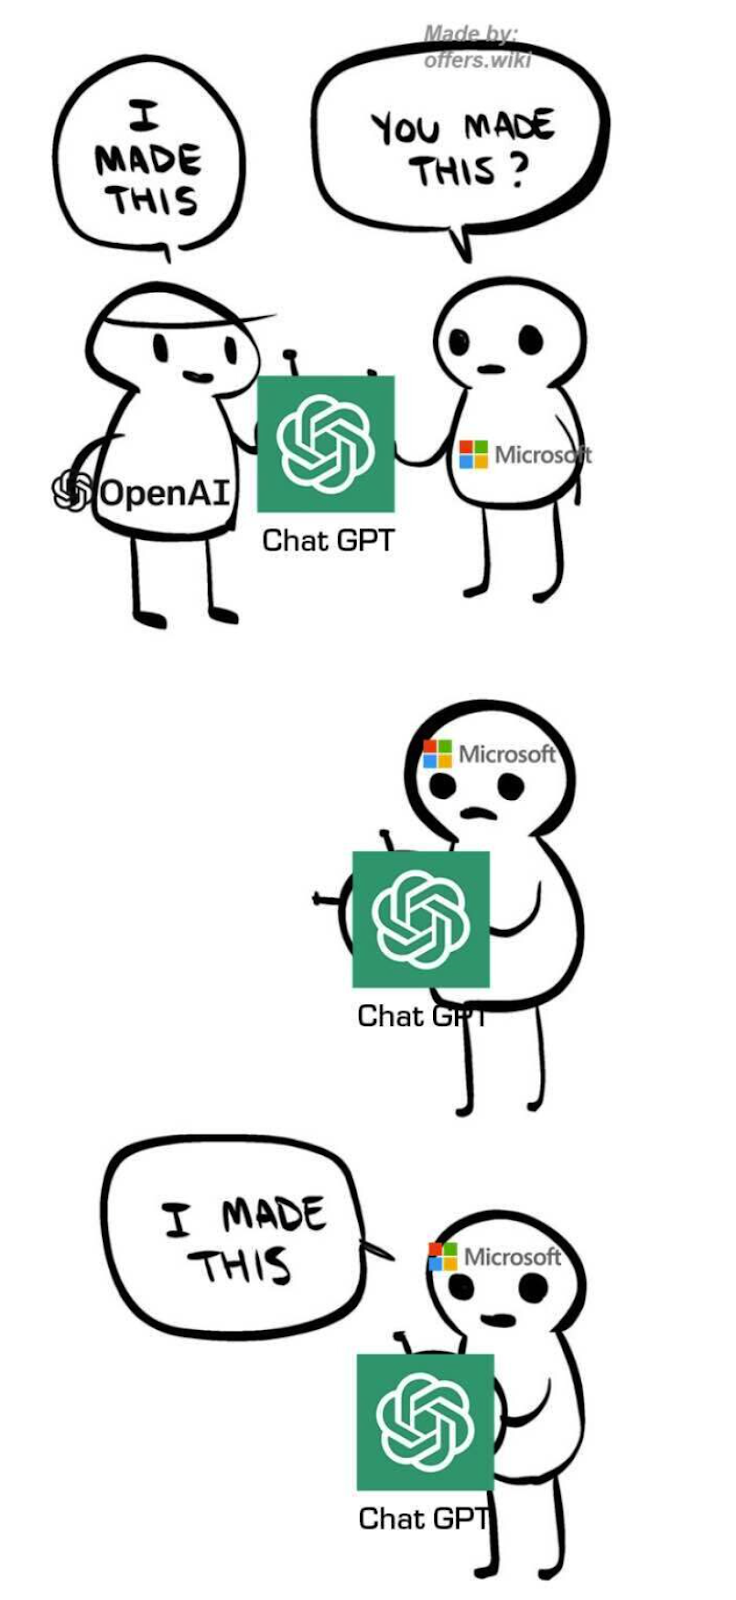 OpenAI Likely To Pull the Plug on ChatGPT